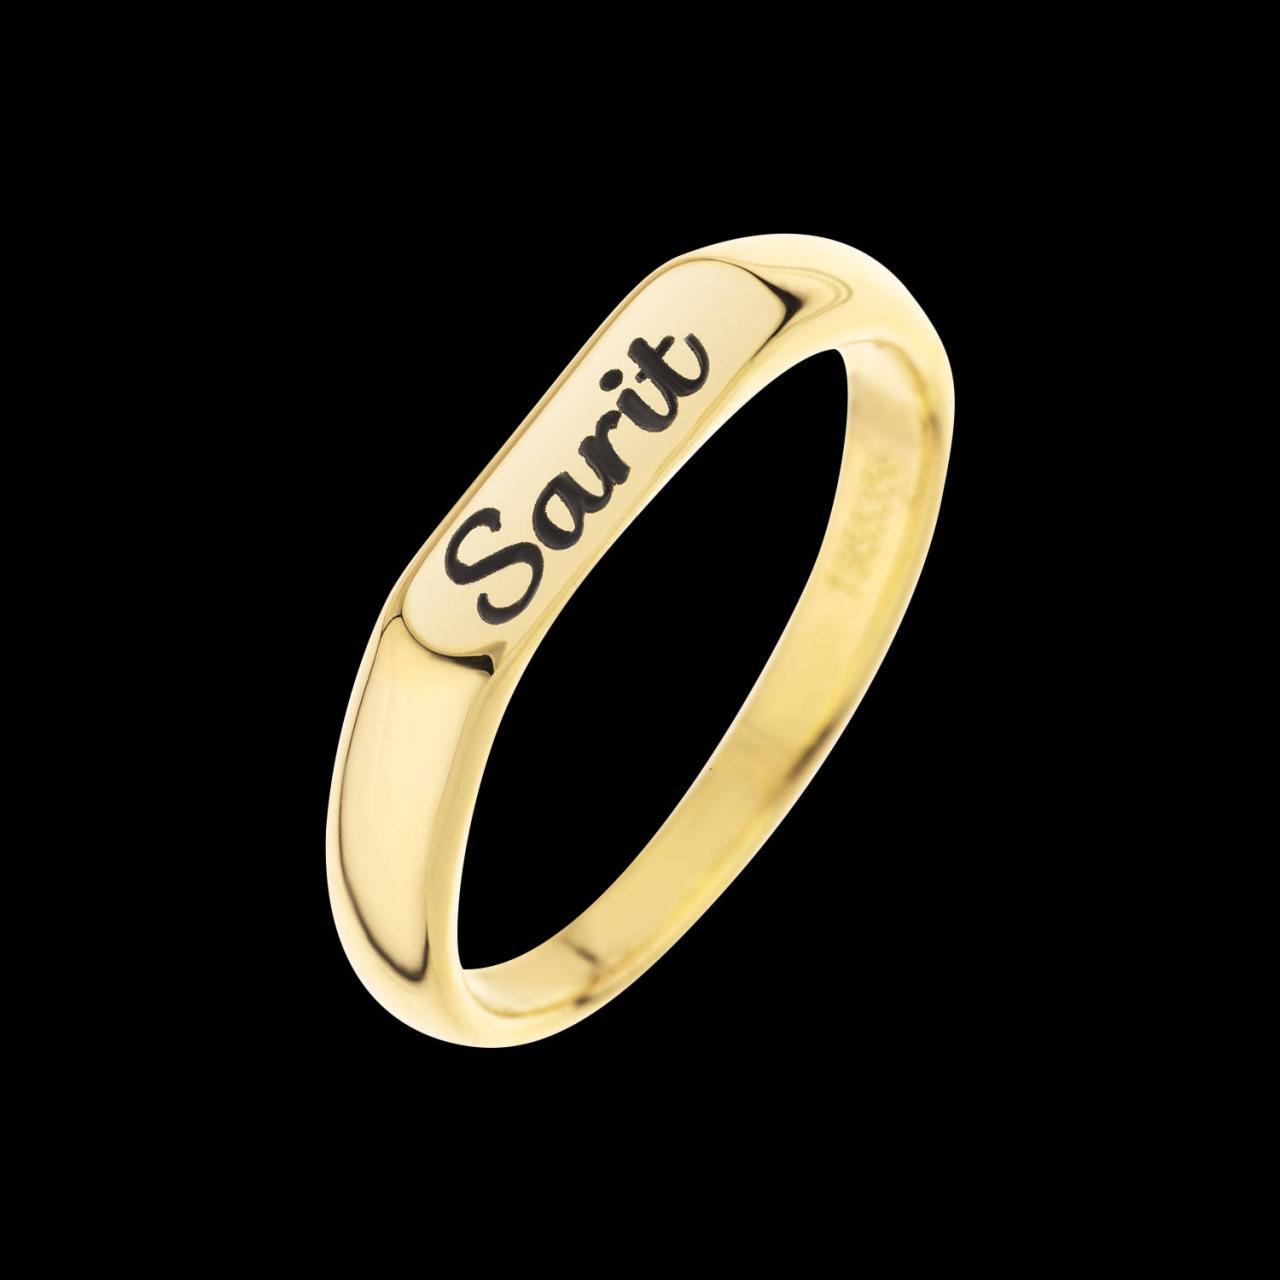 Personalized Ring - Custom Ring - Engraved Ring - Personalized Jewelry - Personalized Gift - Personalized Letter Ring - Gold Name Ring -